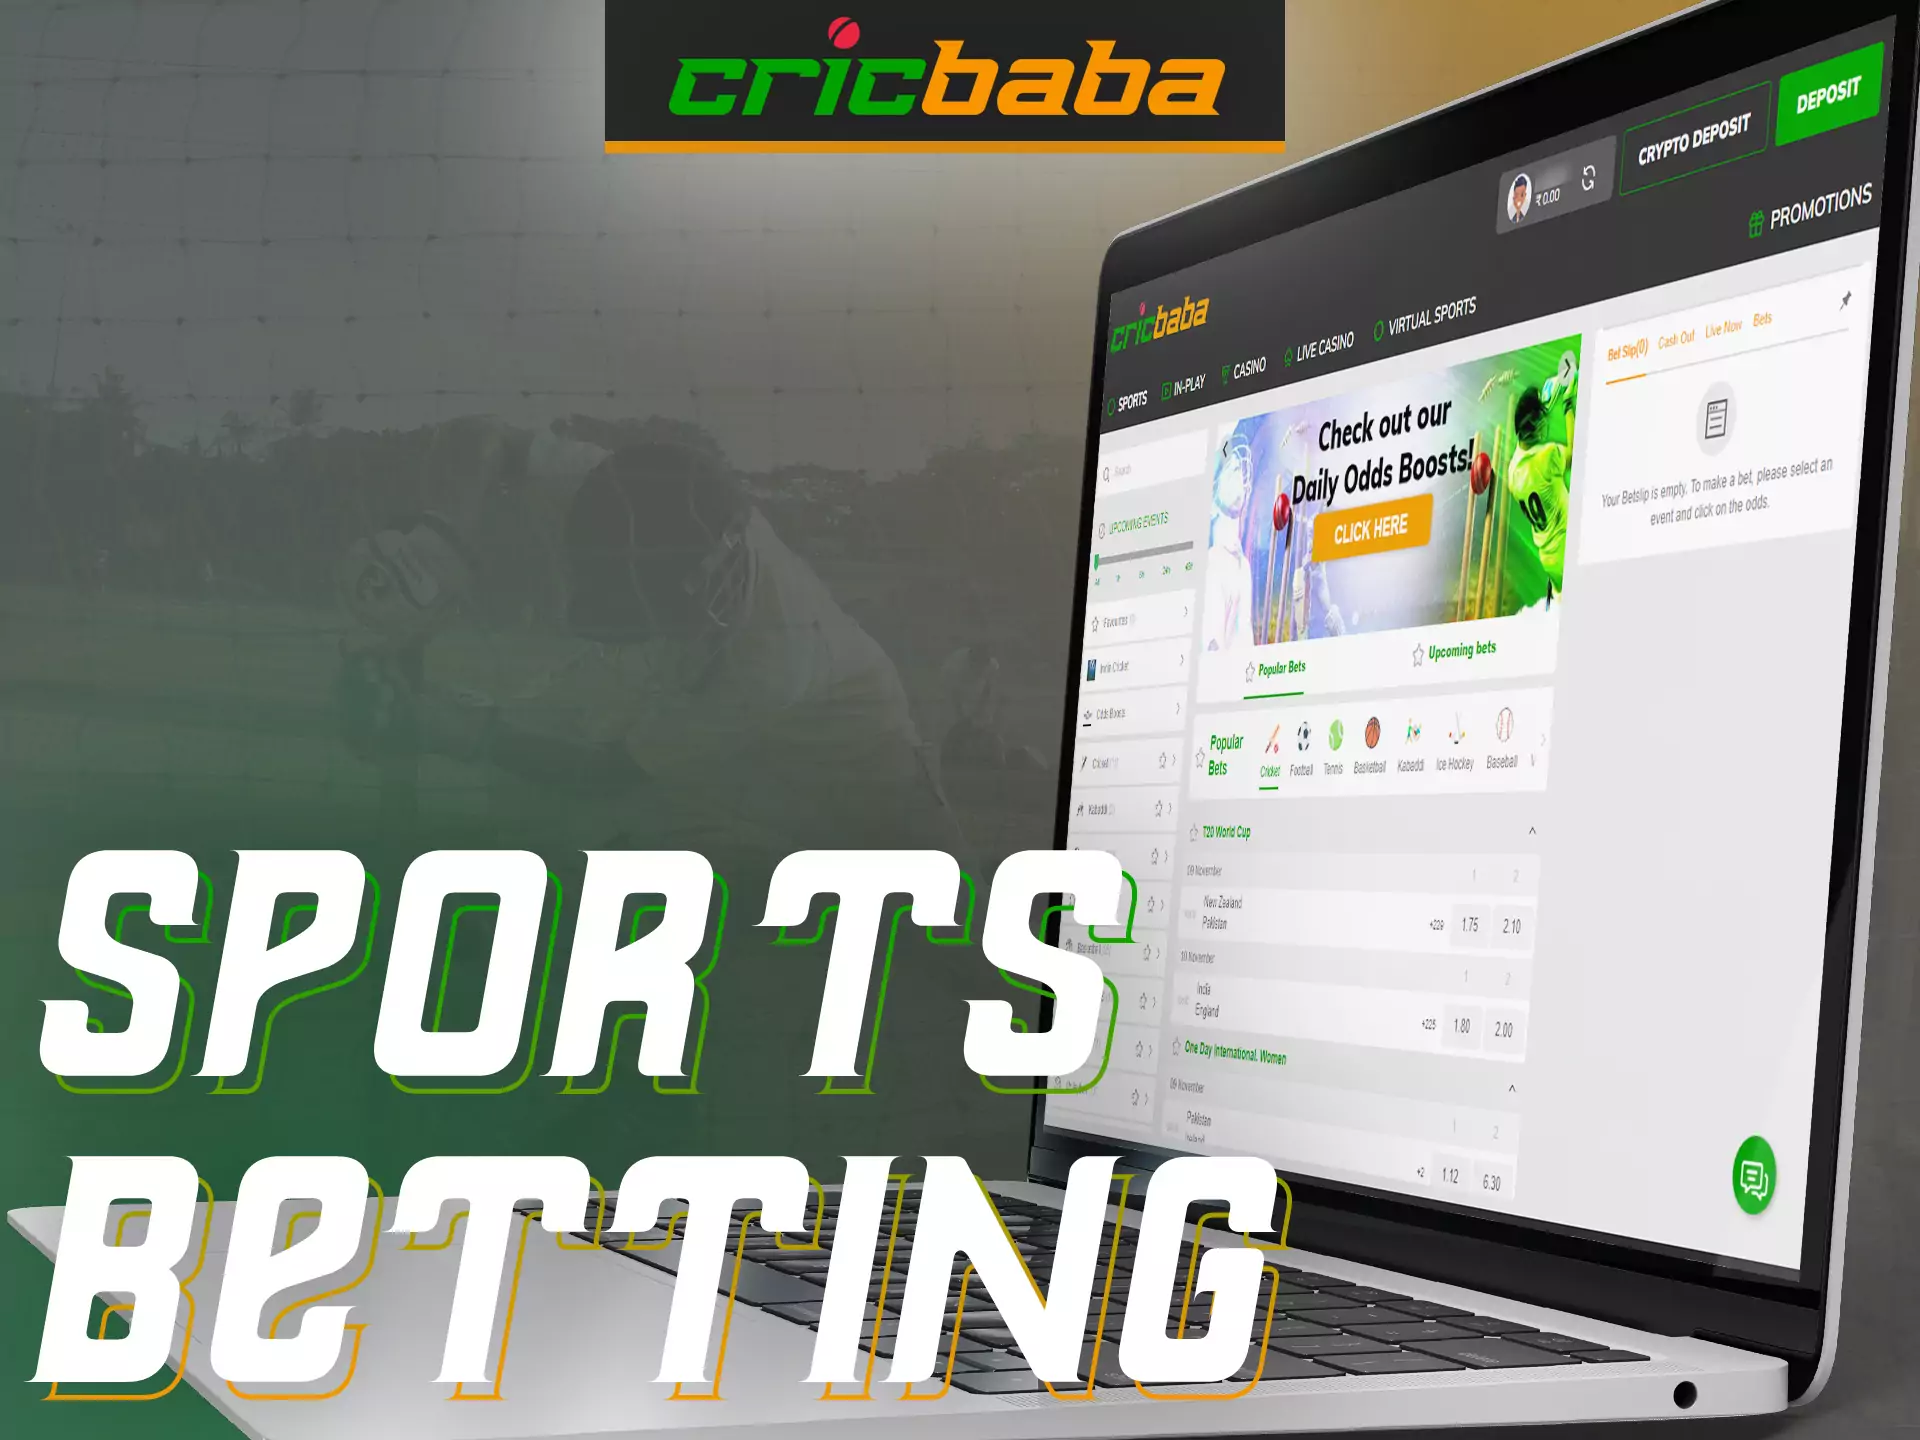 With Cricbaba, you can bet on a variety of sporting events.